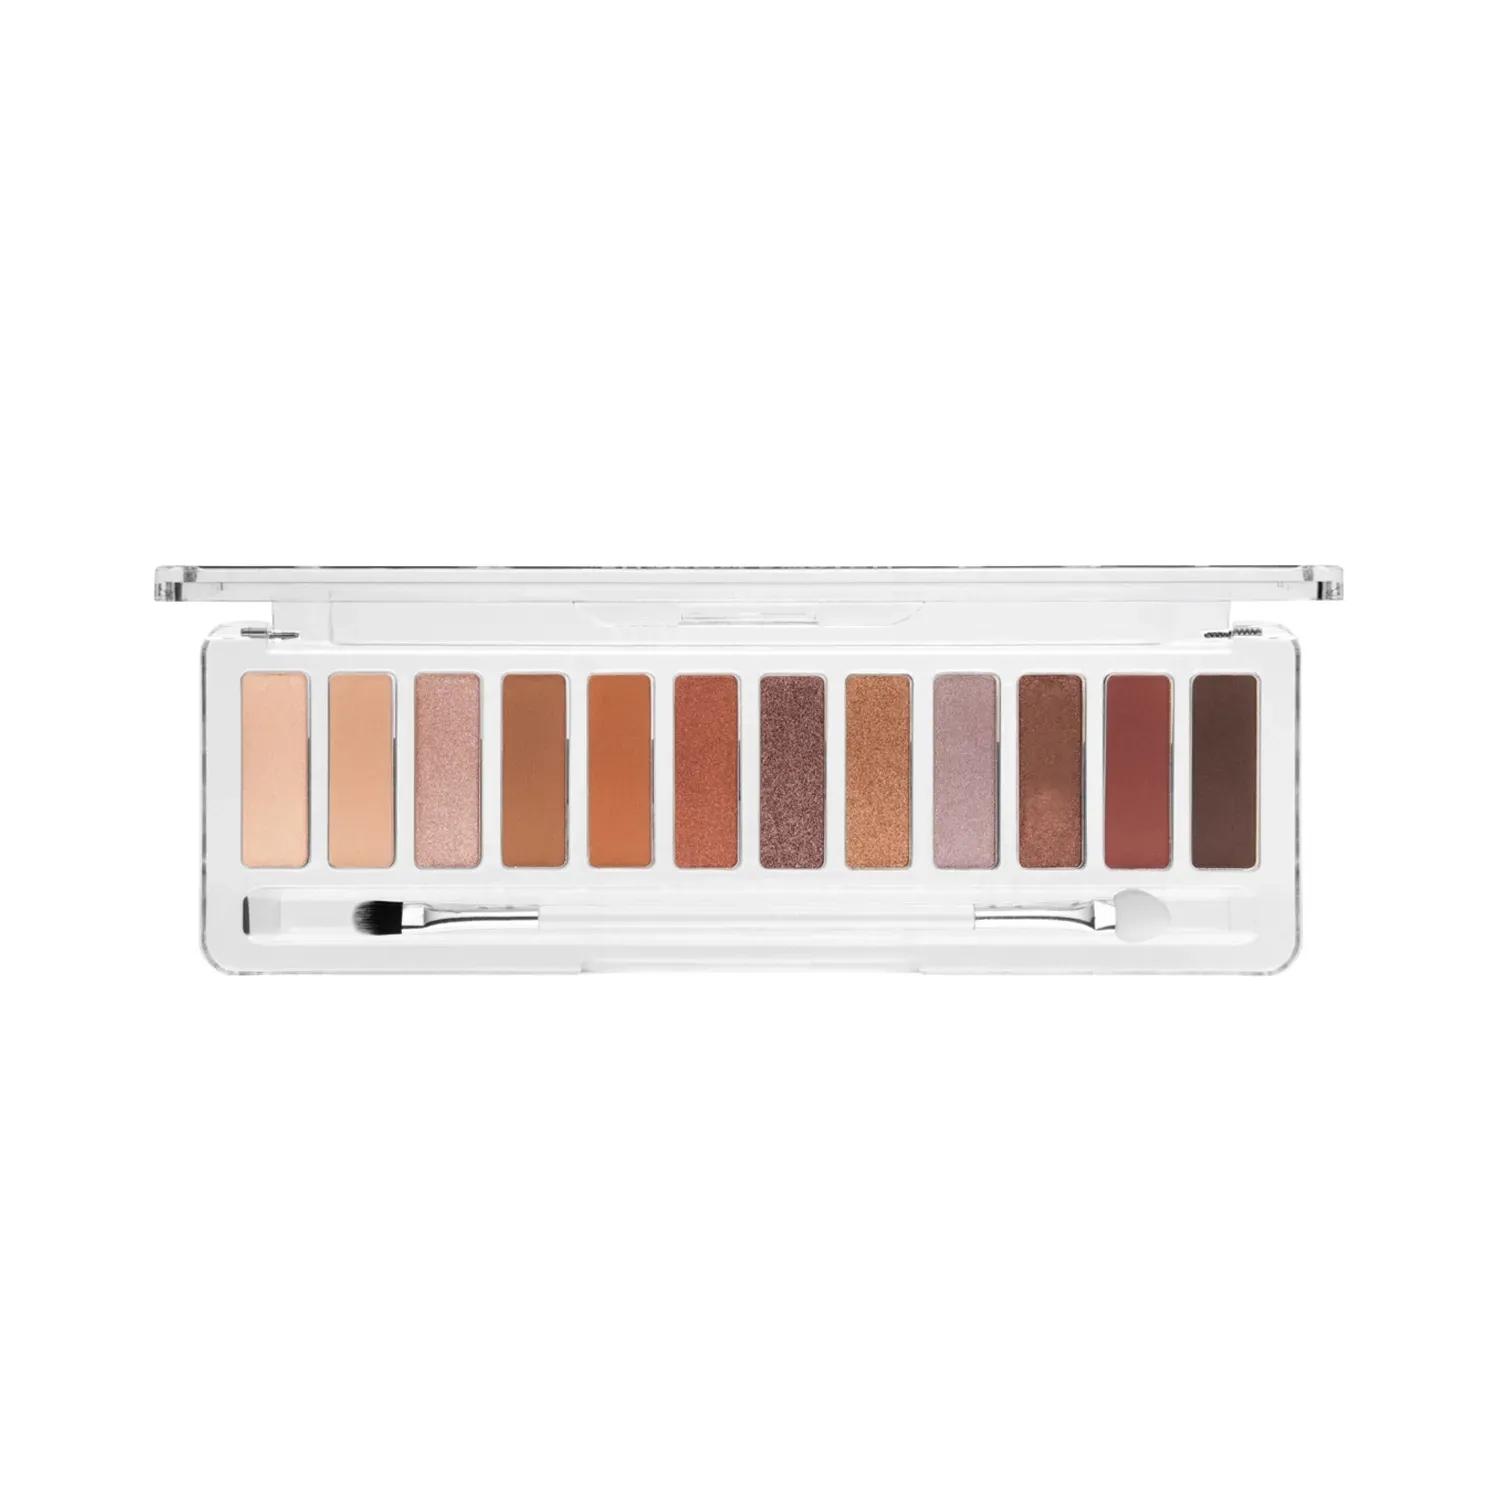 lottie-london-shadow-swatch-eyeshadow-palette-with-brush---the-rusts-(12g)